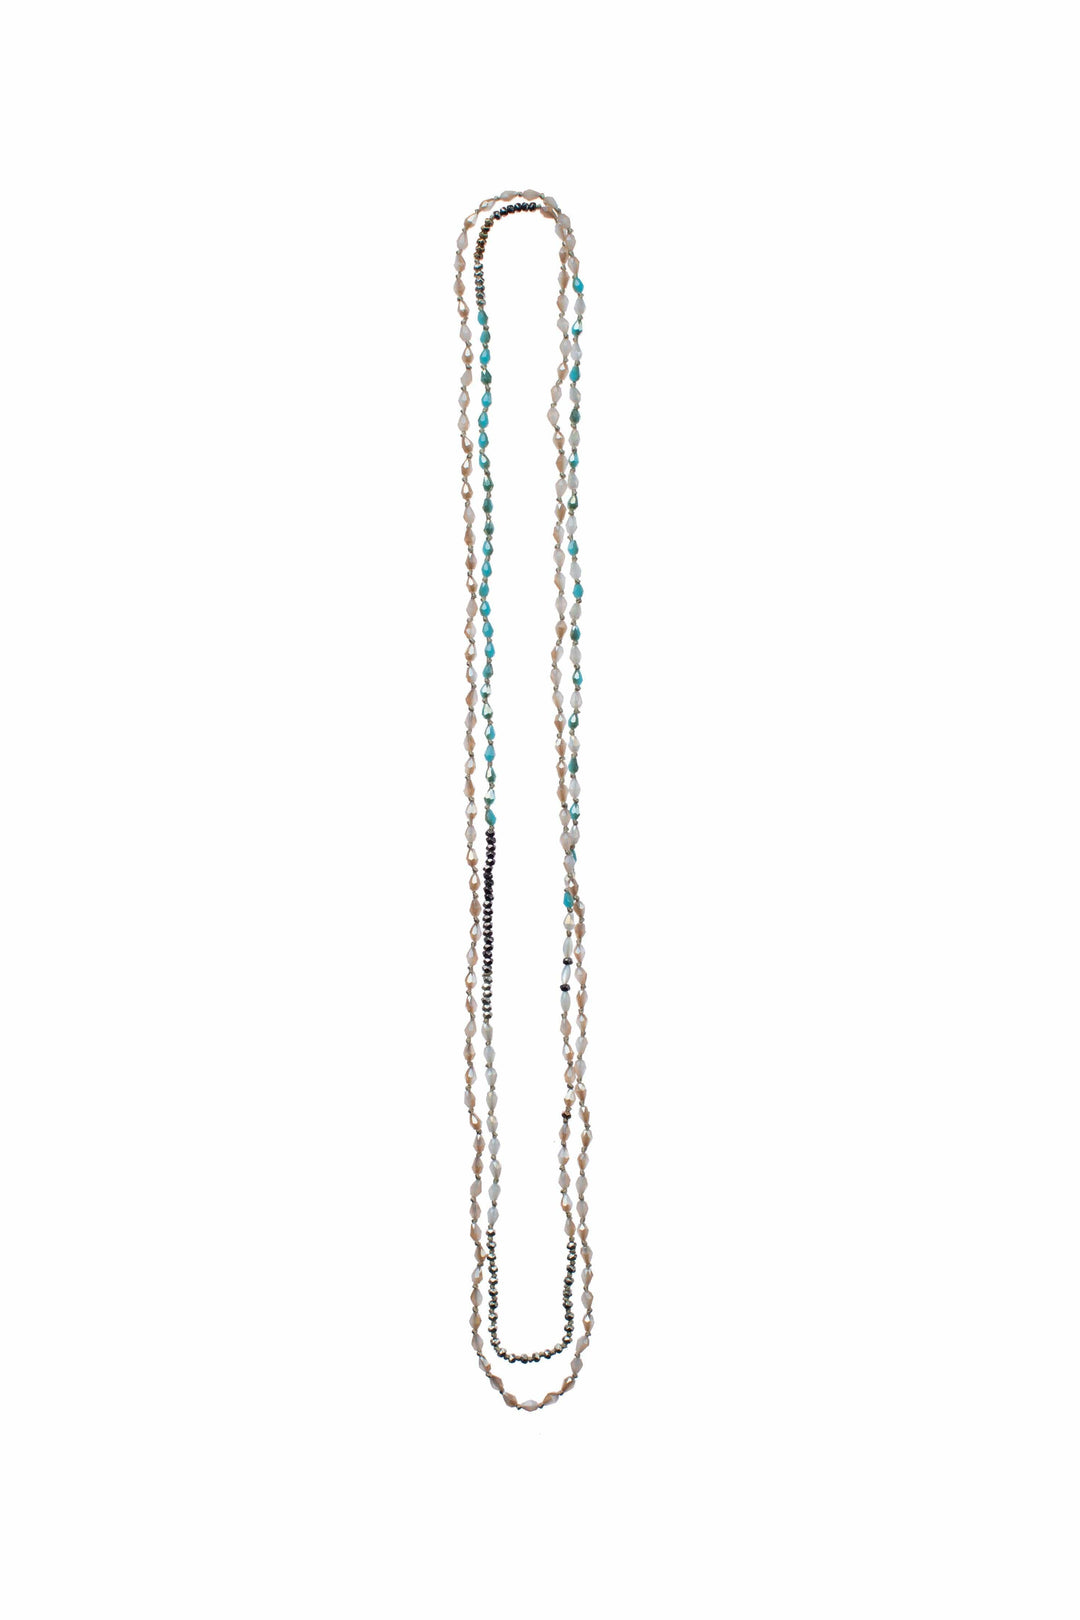 LONG+SKINNY CRYSTAL NECKLACE-CREAM, TURQ & GOLD - Esme and Elodie